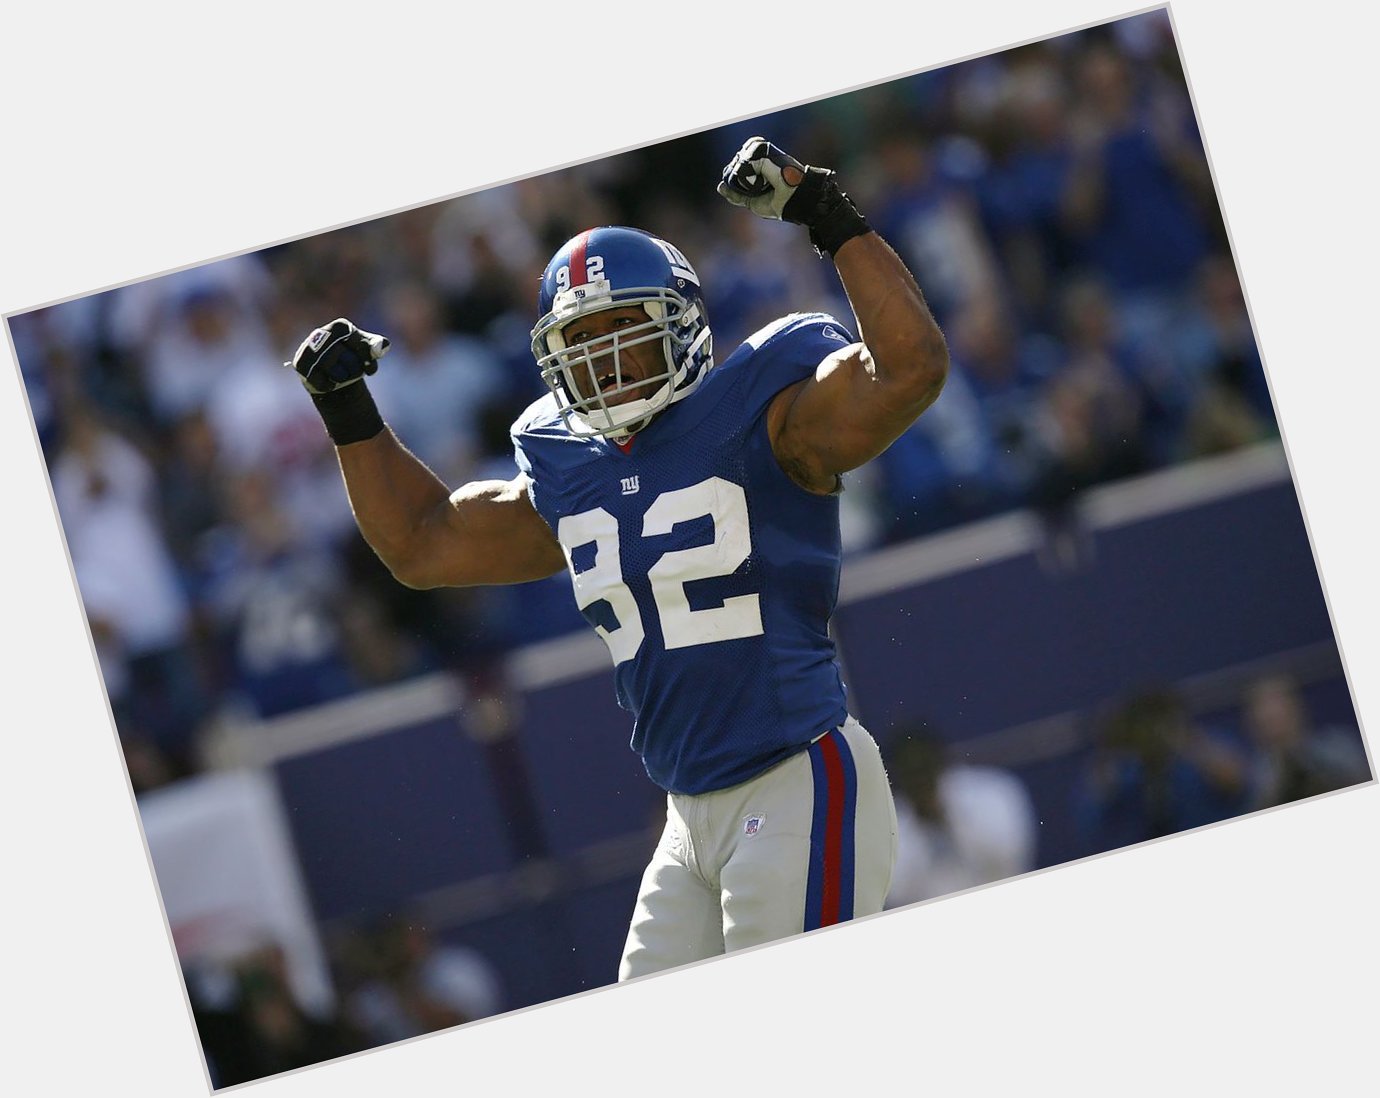 Happy Birthday to Michael Strahan who turns 46 today! 